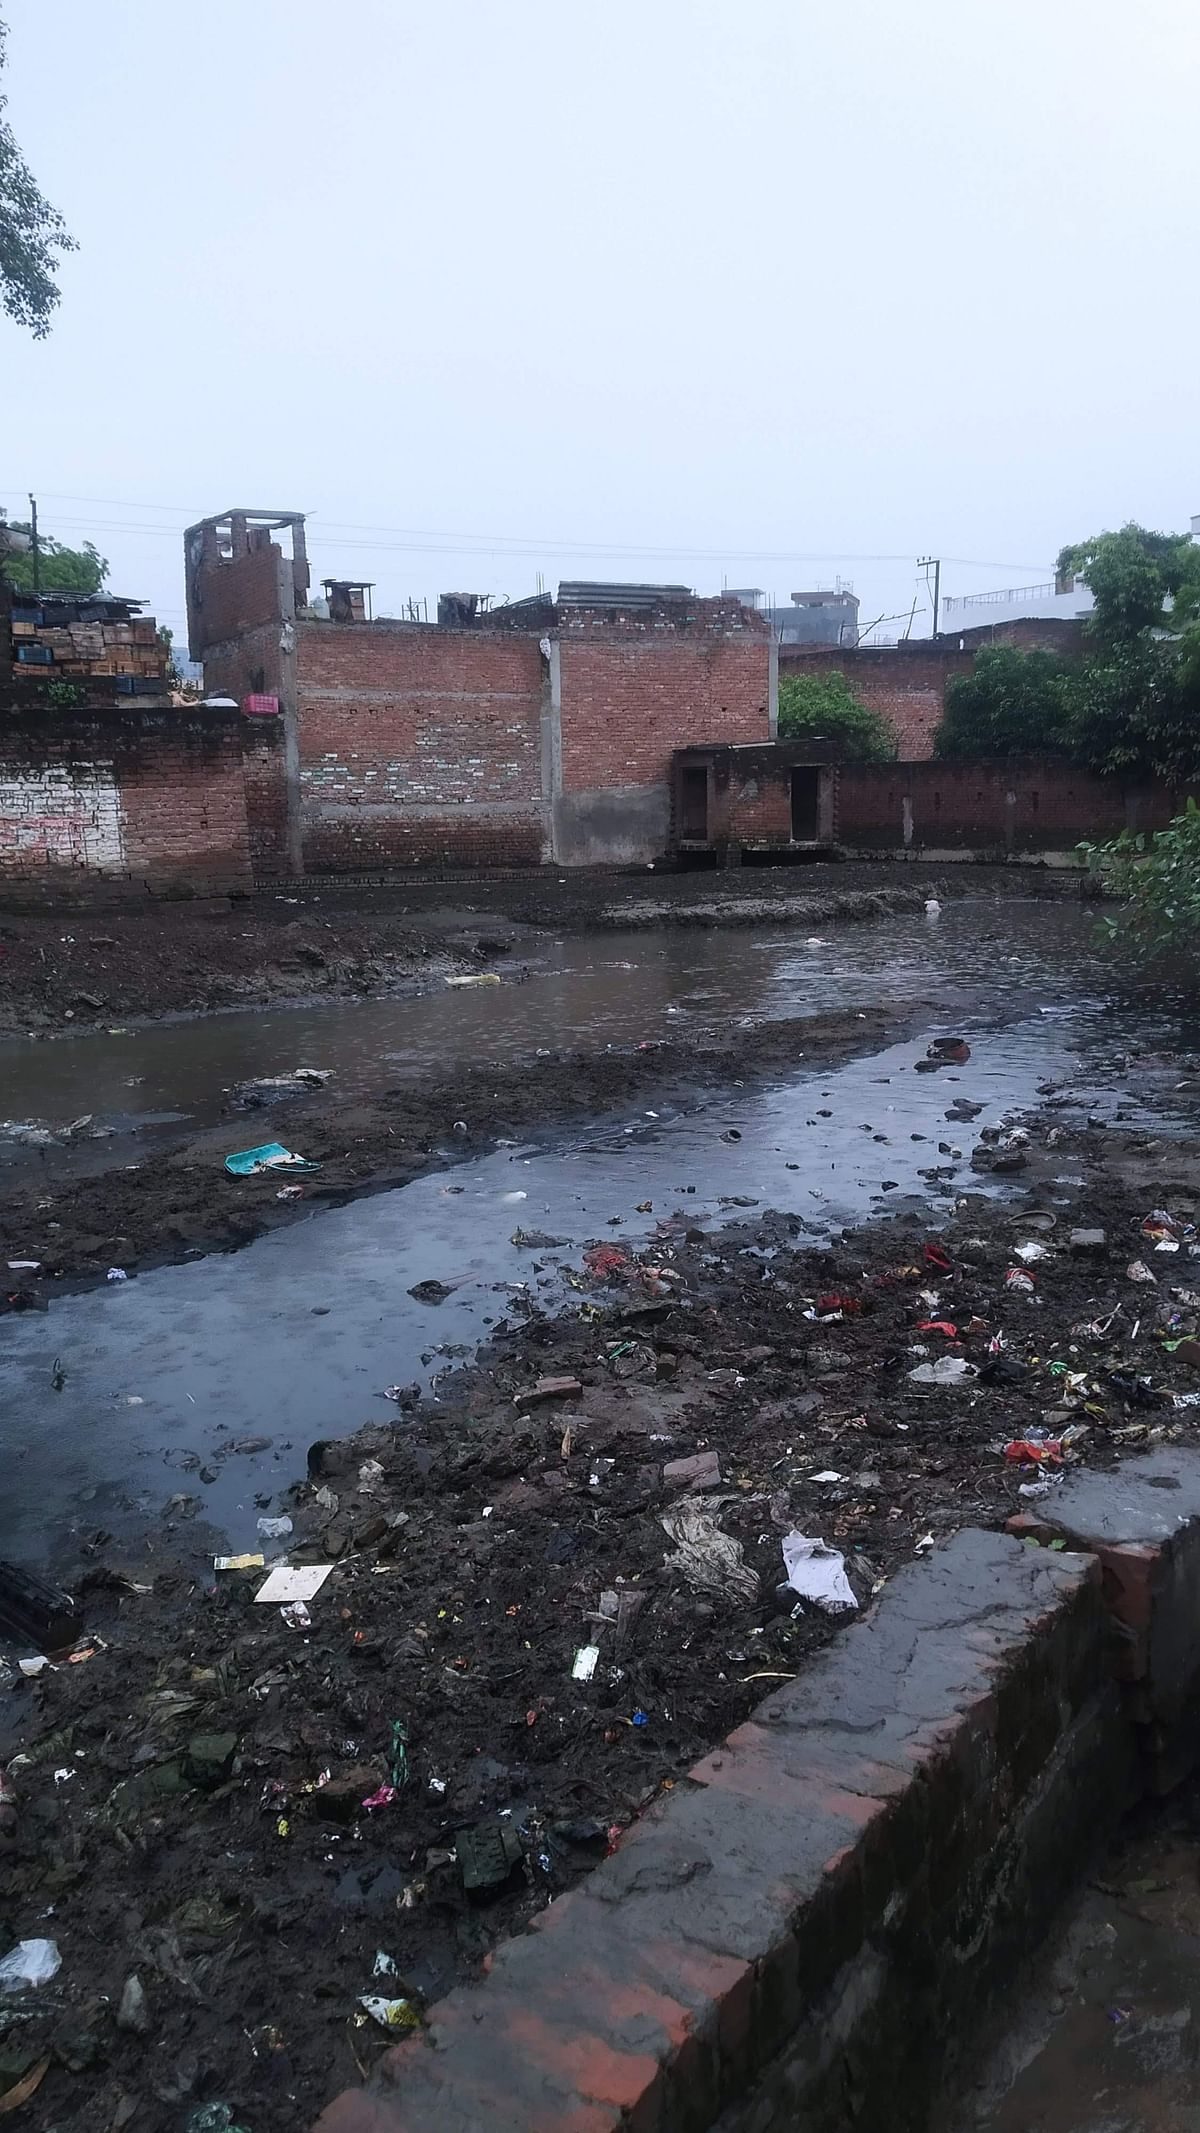 On what basis was a heavily polluted Assi RIver selected for India Smart City Awards 2020?